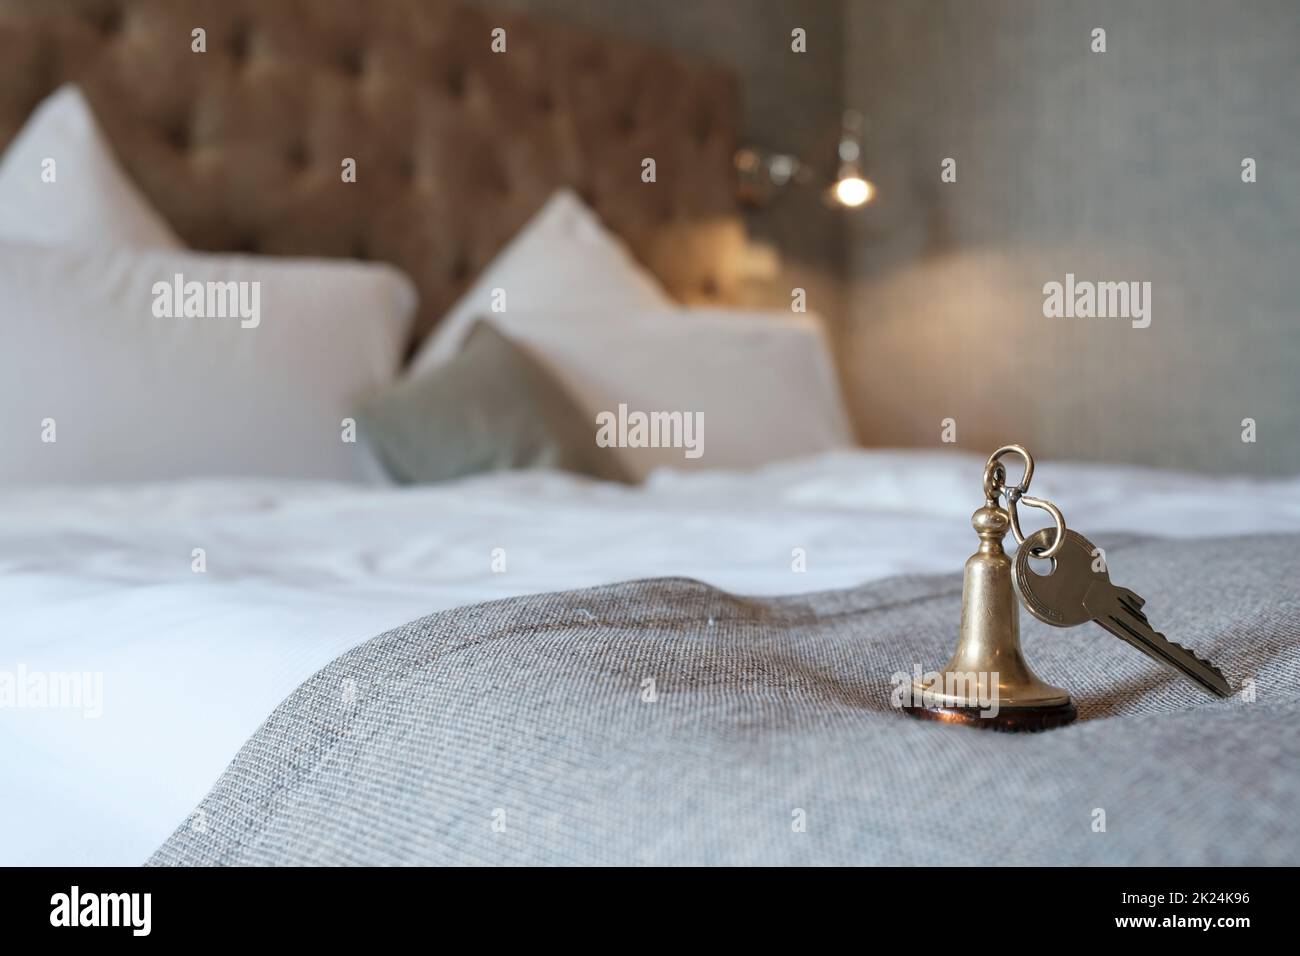 Key with a key fob from the hotel room lies on the bed. Stock Photo